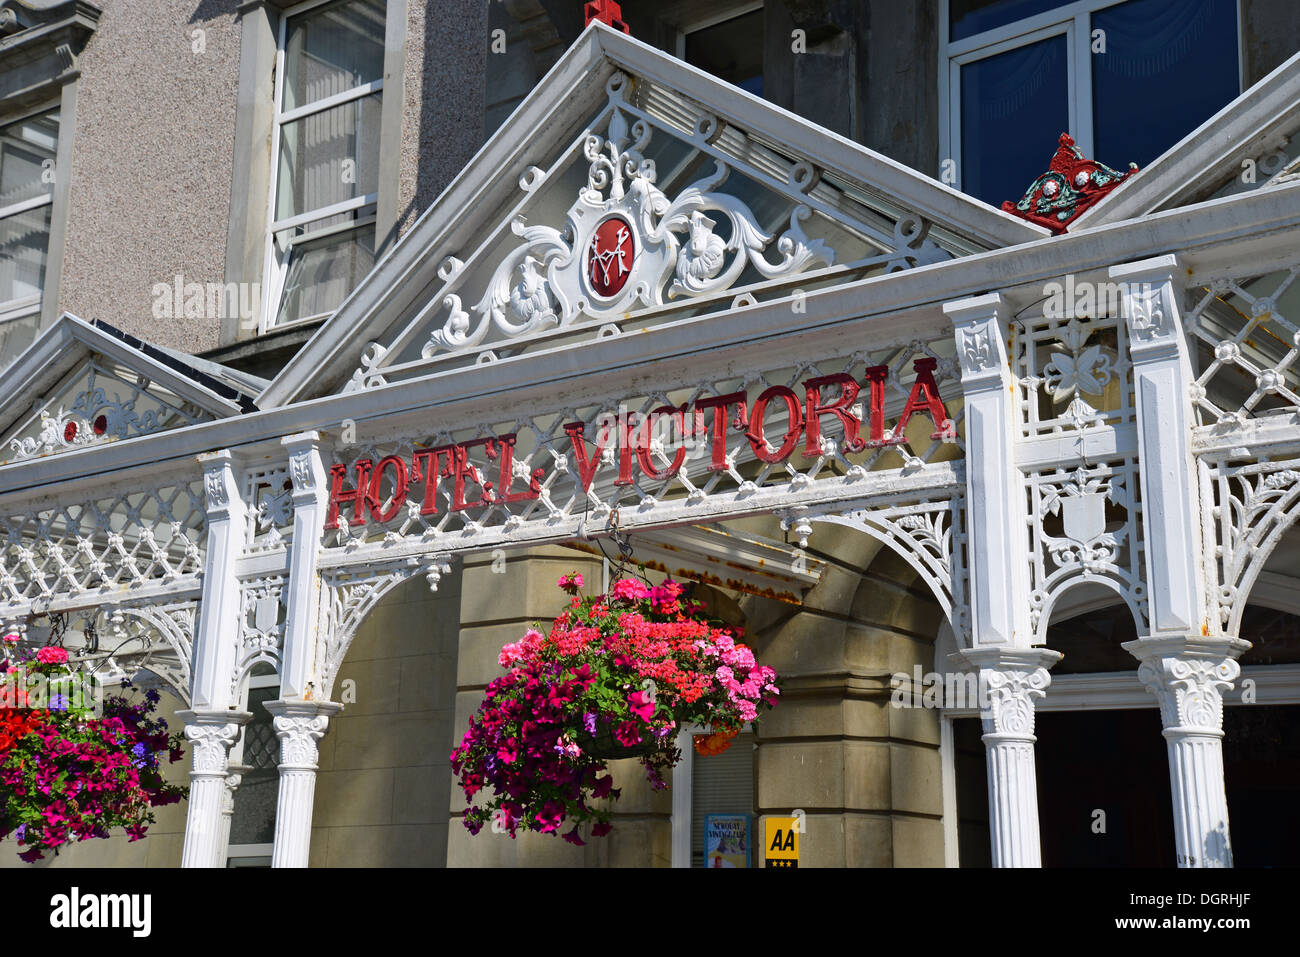 Wrought iron entrance to Hotel Victoria, East Street, Newquay, Cornwall, England, United Kingdom Stock Photo